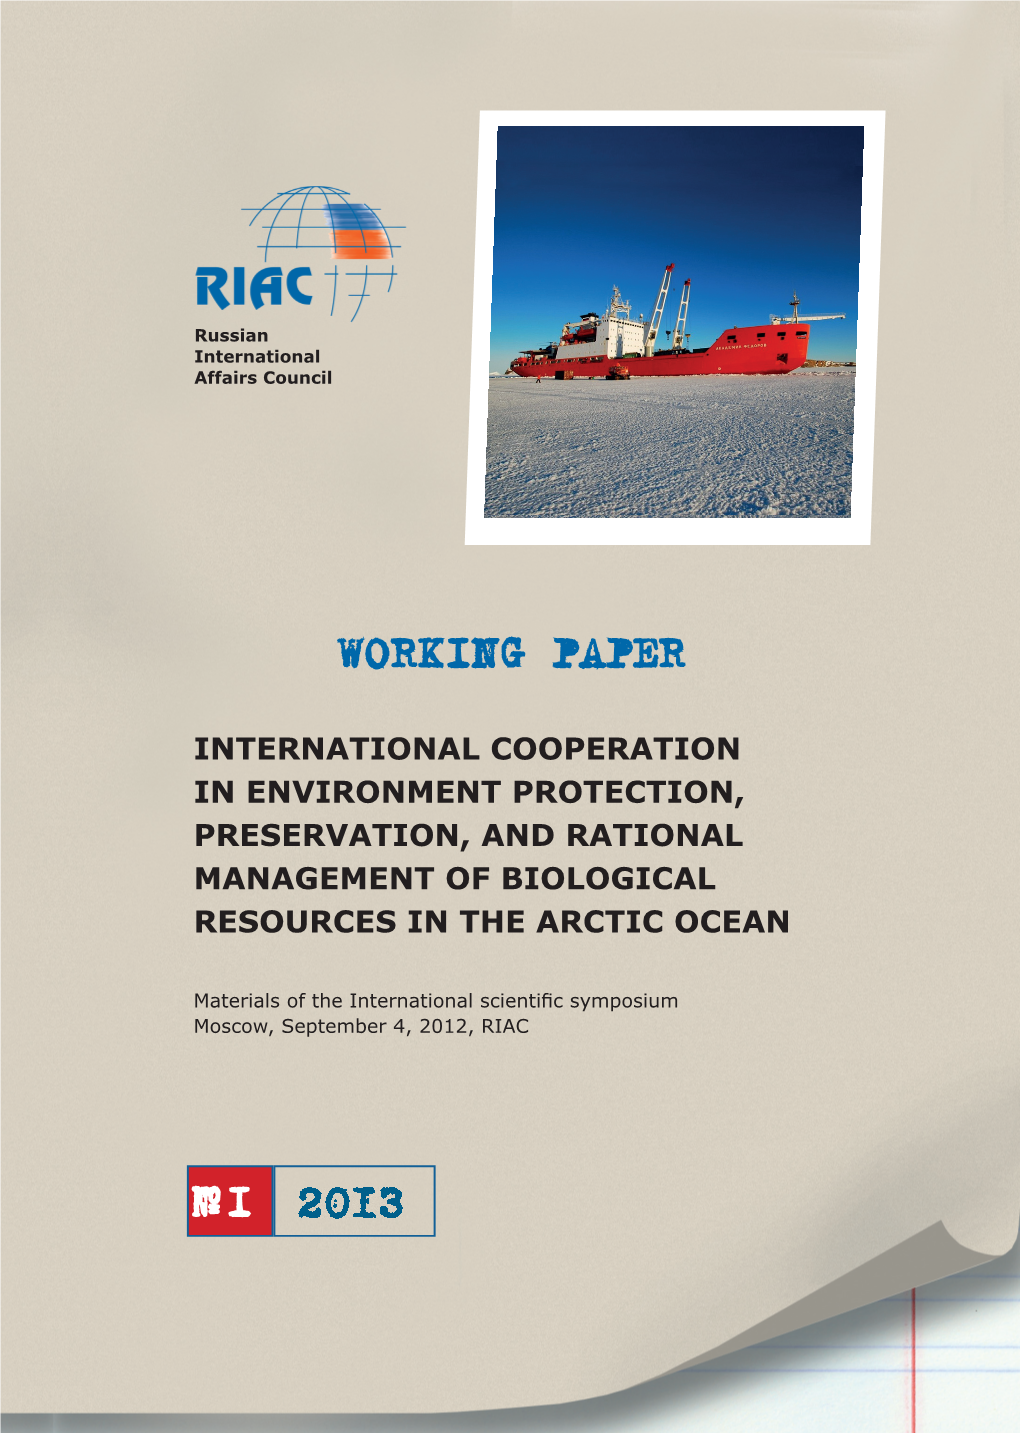 International Cooperation in Environment Protection, Preservation, and Rational Management of Biological Resources in the Arctic Ocean